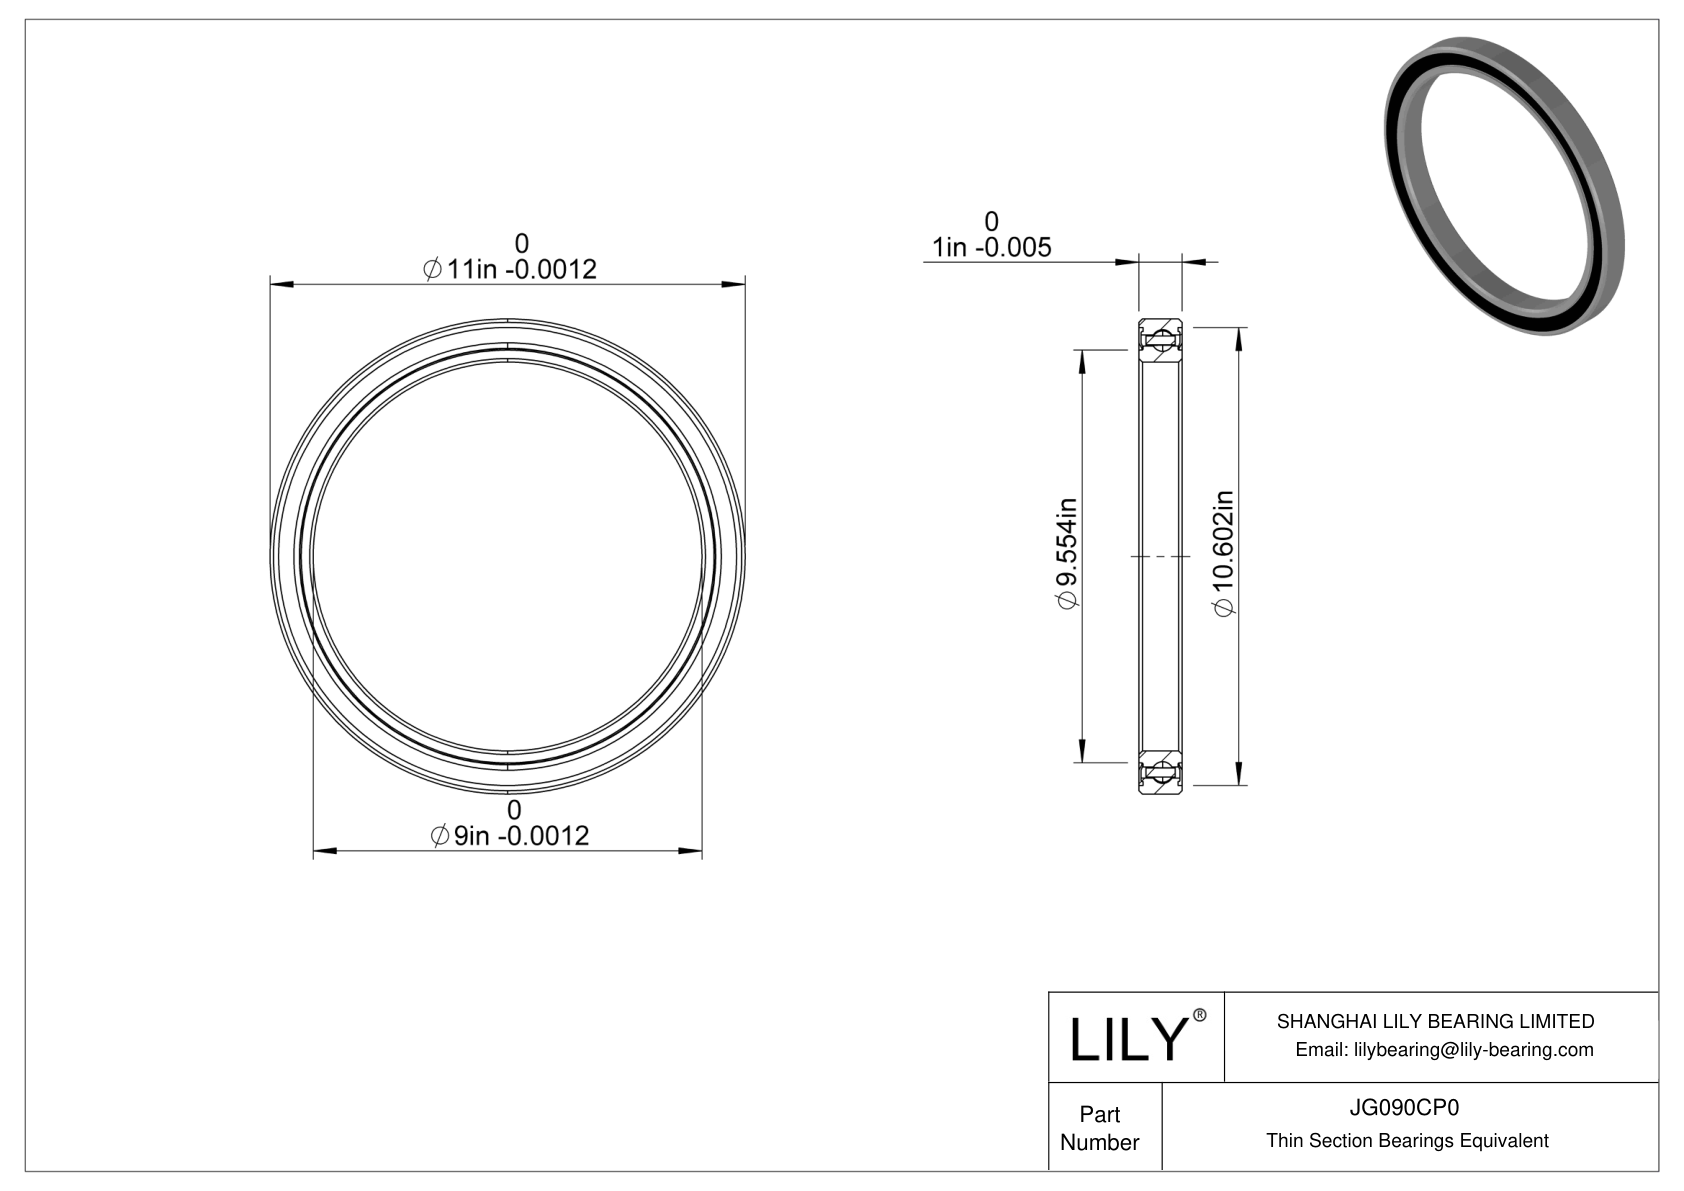 JG090CP0 Constant Section (CS) Bearings cad drawing